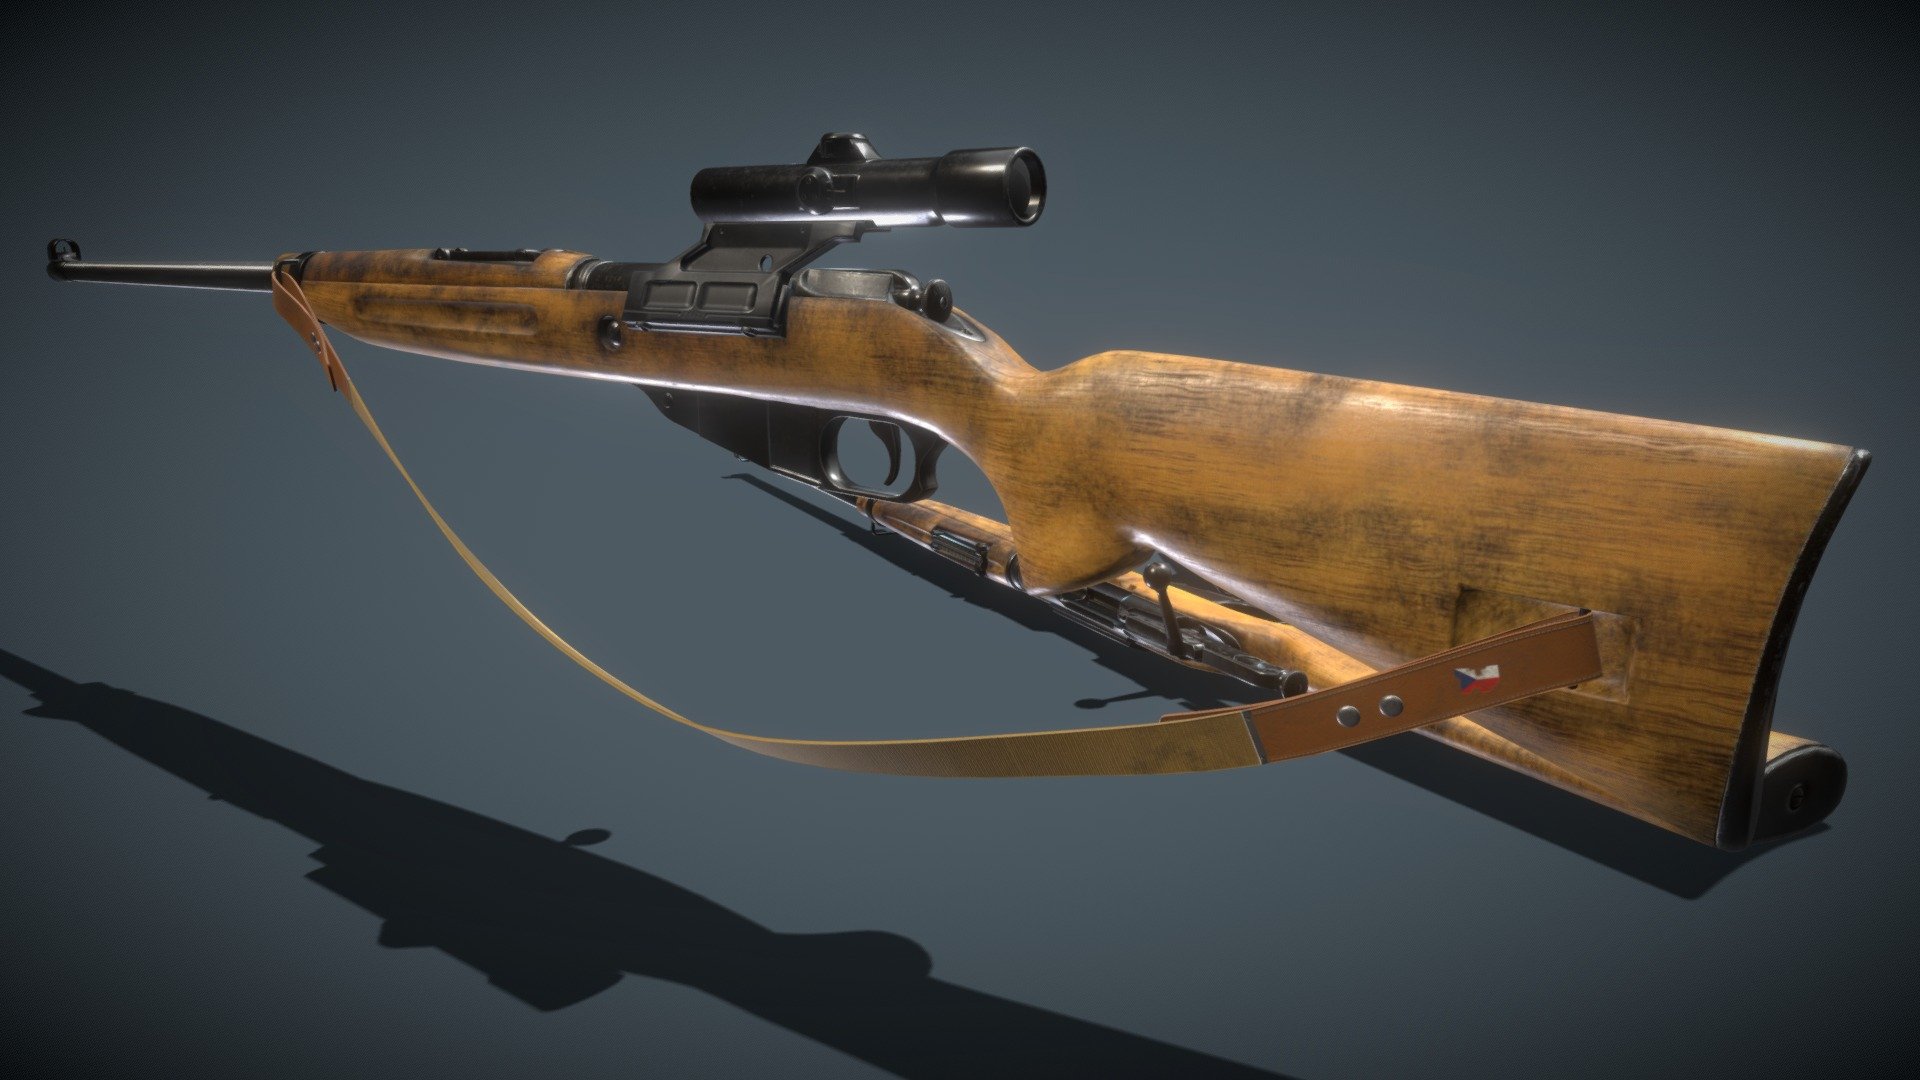 The vz.54 sniper rifle is a Czechoslovakian modification of the Soviet Mosin-Nagant rifles. It was designed by Otakar Galaš and produced in late 50s.

Polycount




37 559 triangles

19 776 faces

Textures




2k textures

png

3 texture sets

basecolor, metalness, roughness, ambient occlusion and normal map

Other info




blend file version 2.93 +
 - vz.54 sniper rifle - Download Free 3D model by Michal Cavrnoch (@MichalCavrnoch) 3d model